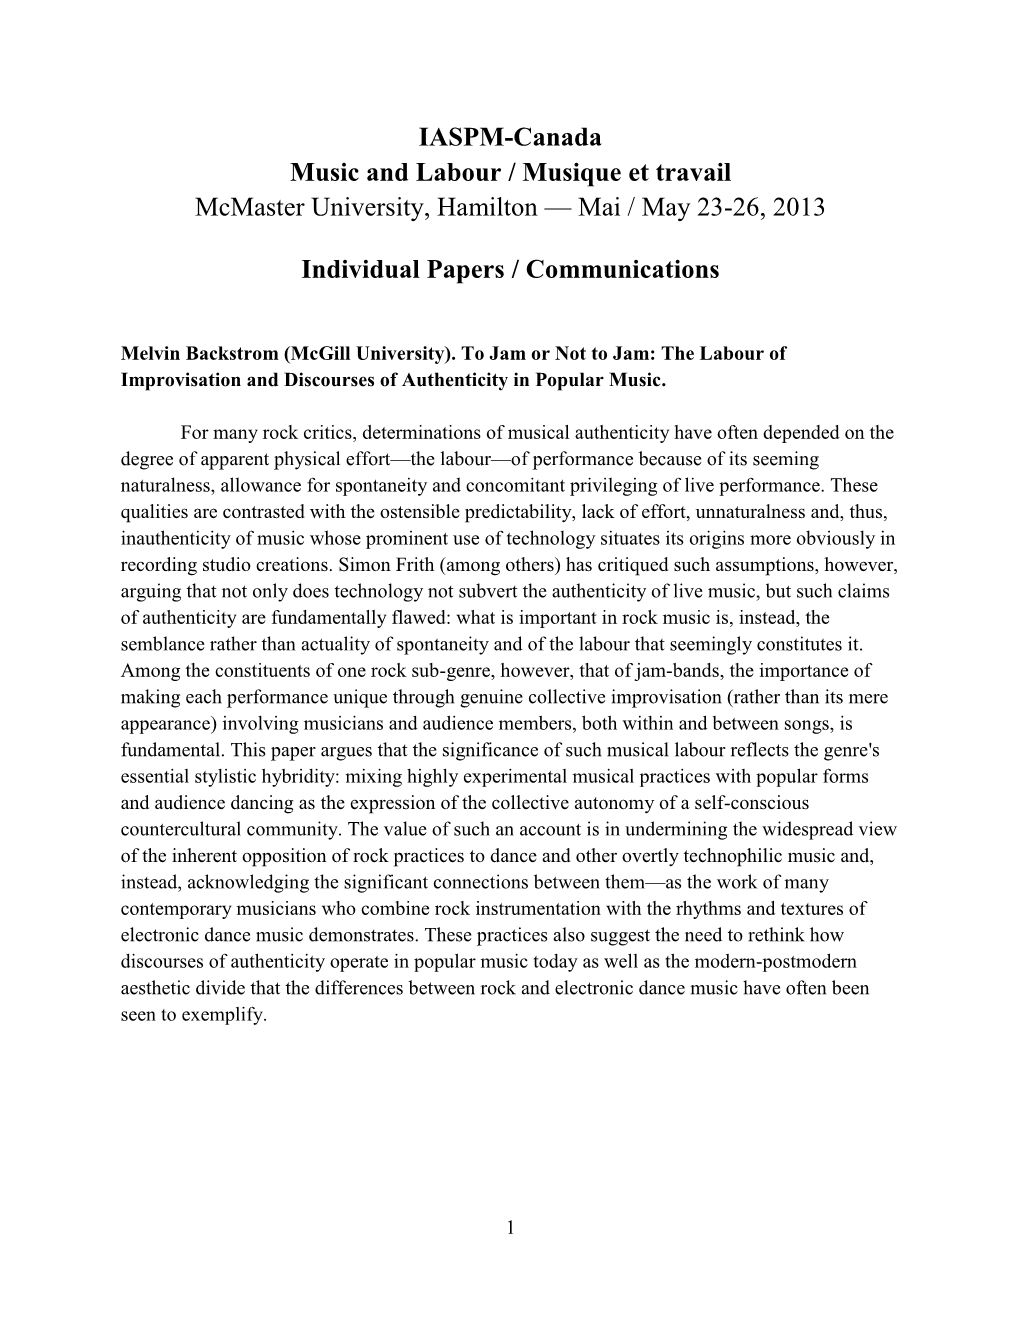 IASPM-Canada Music and Labour / Musique Et Travail Mcmaster University, Hamilton — Mai / May 23-26, 2013